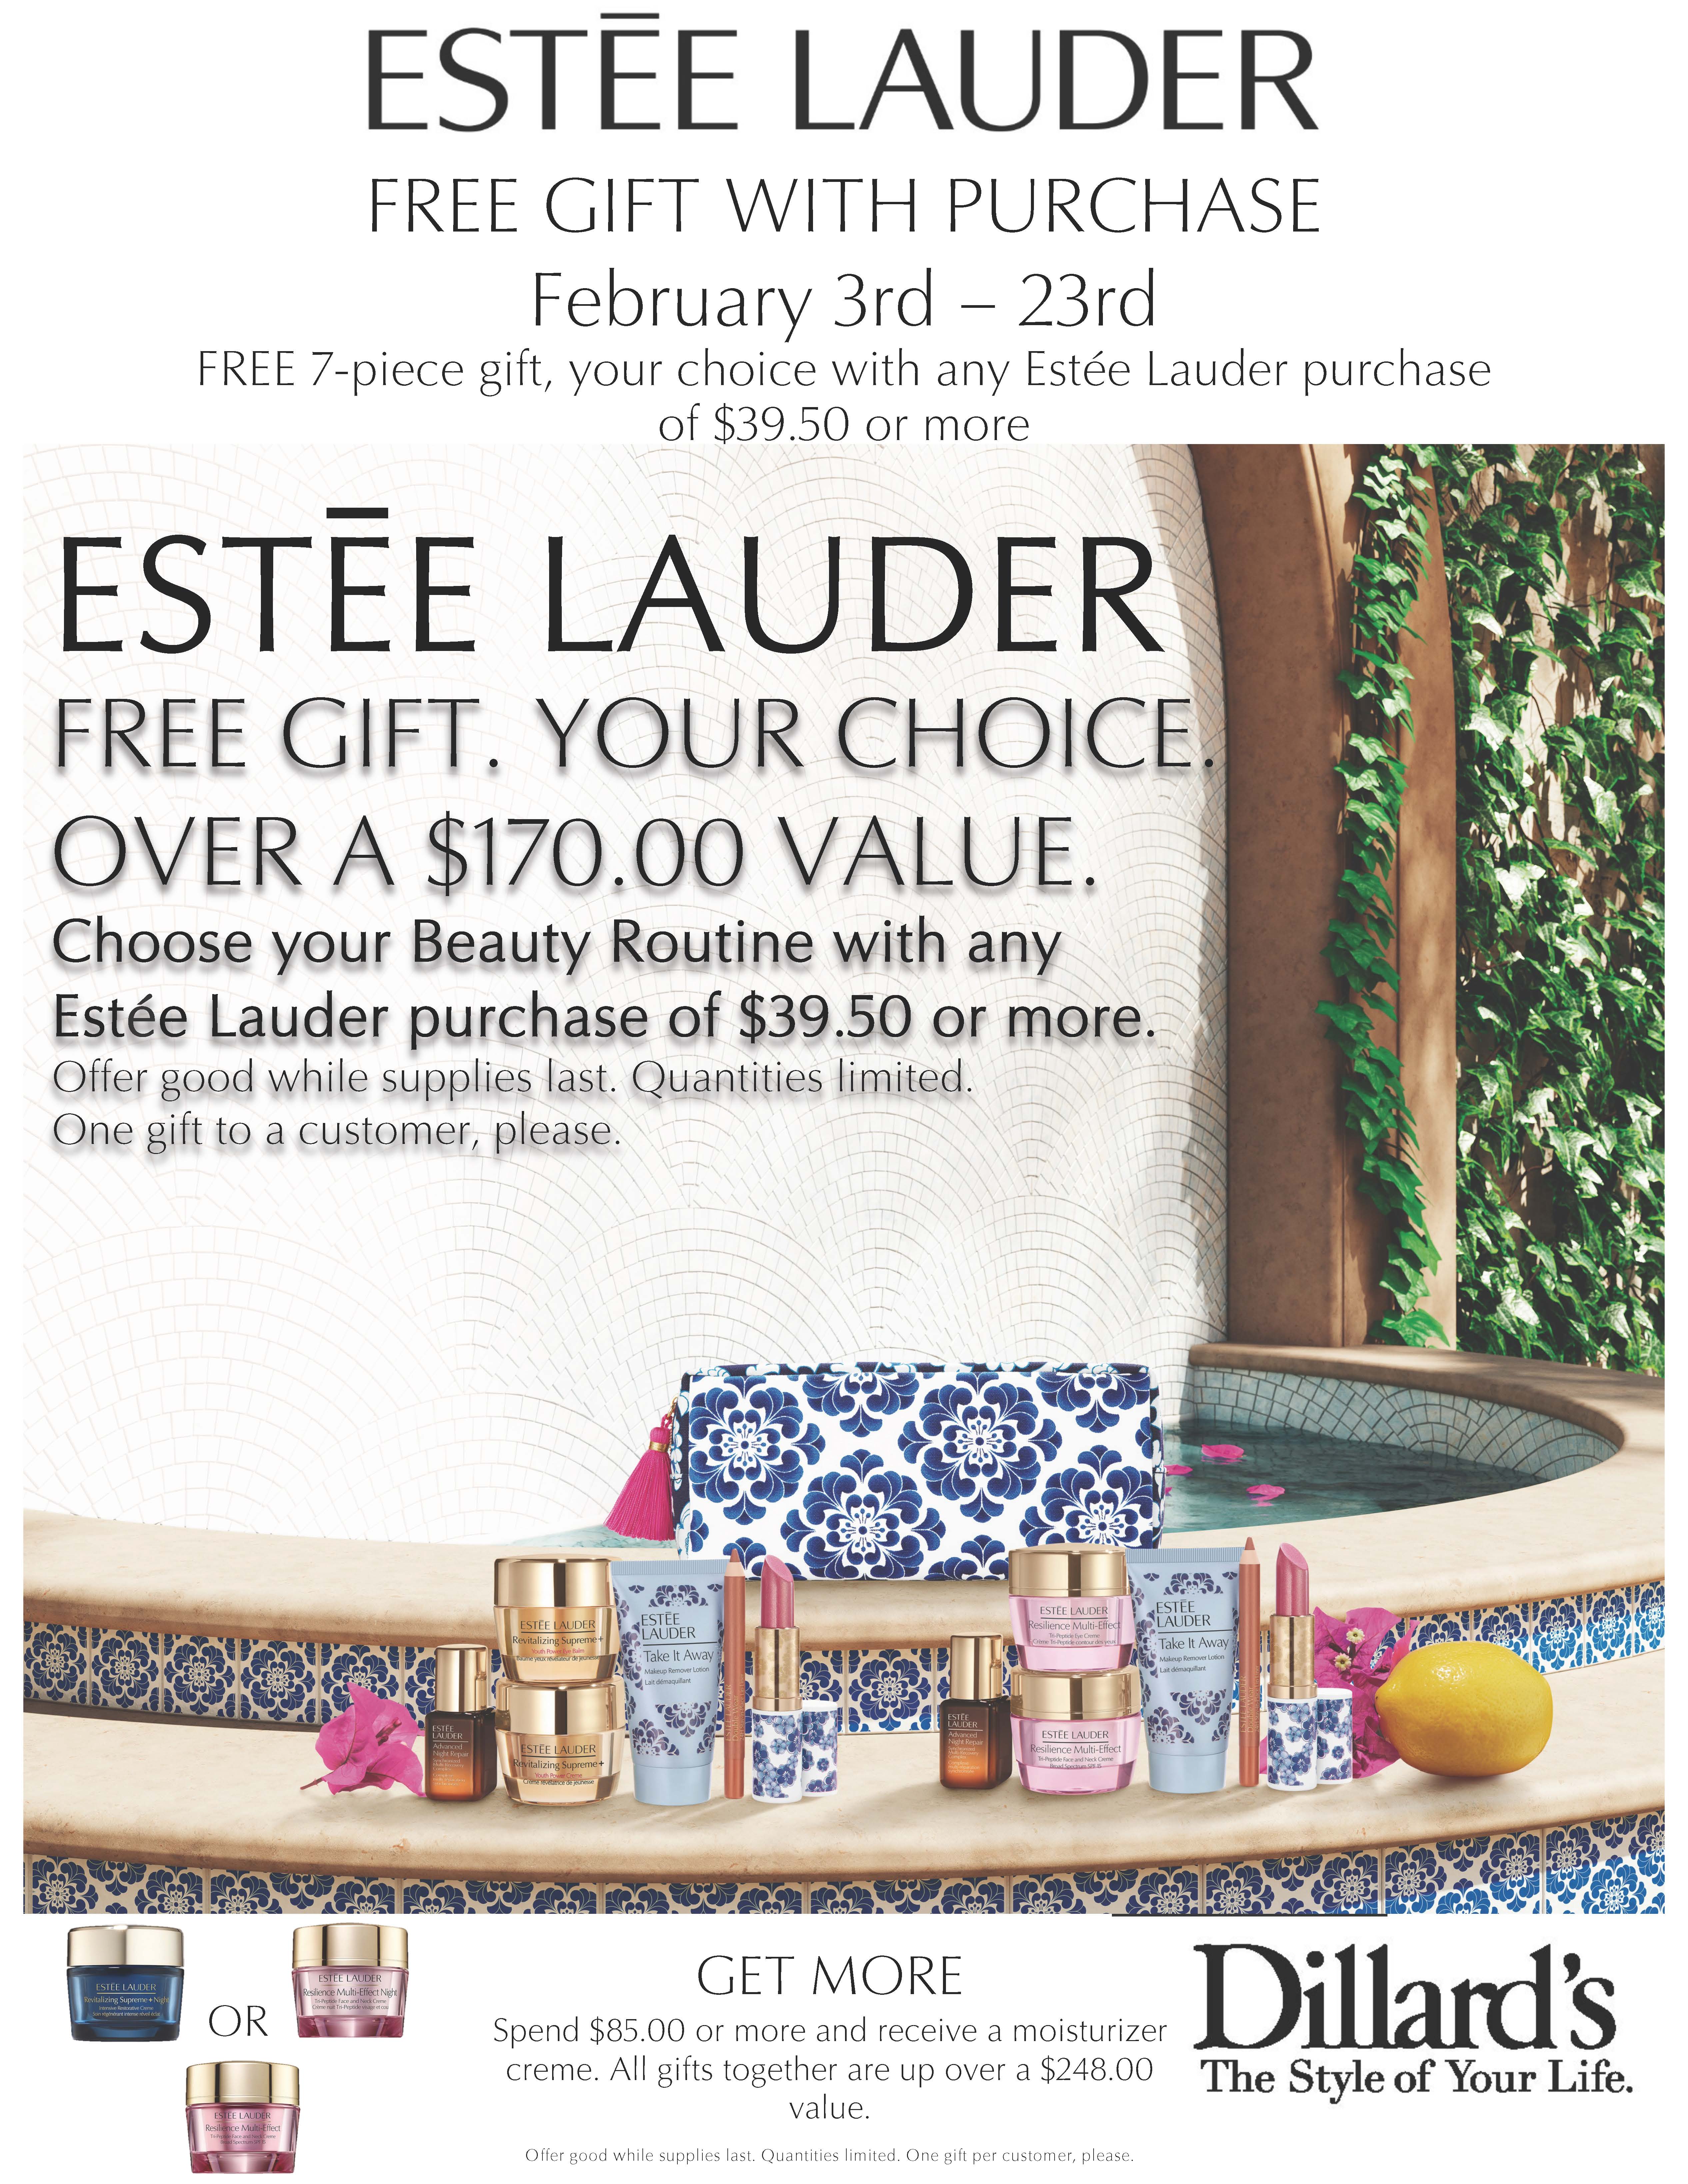 Estee Lauder Free Gift With Purchase at Dillard's from Dillard's